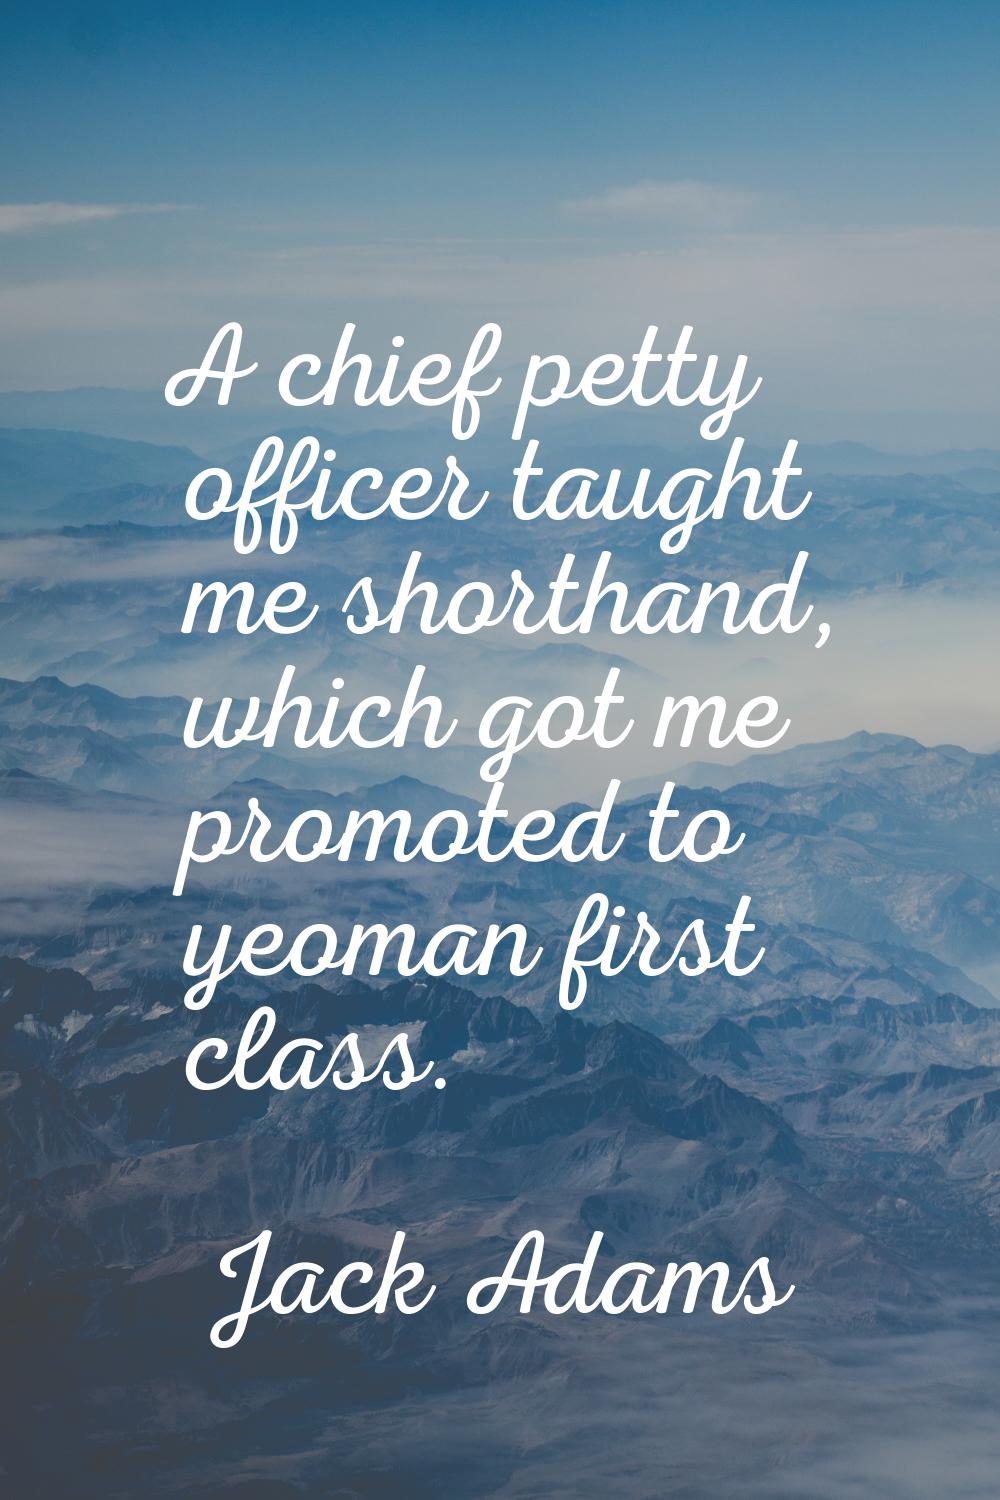 A chief petty officer taught me shorthand, which got me promoted to yeoman first class.